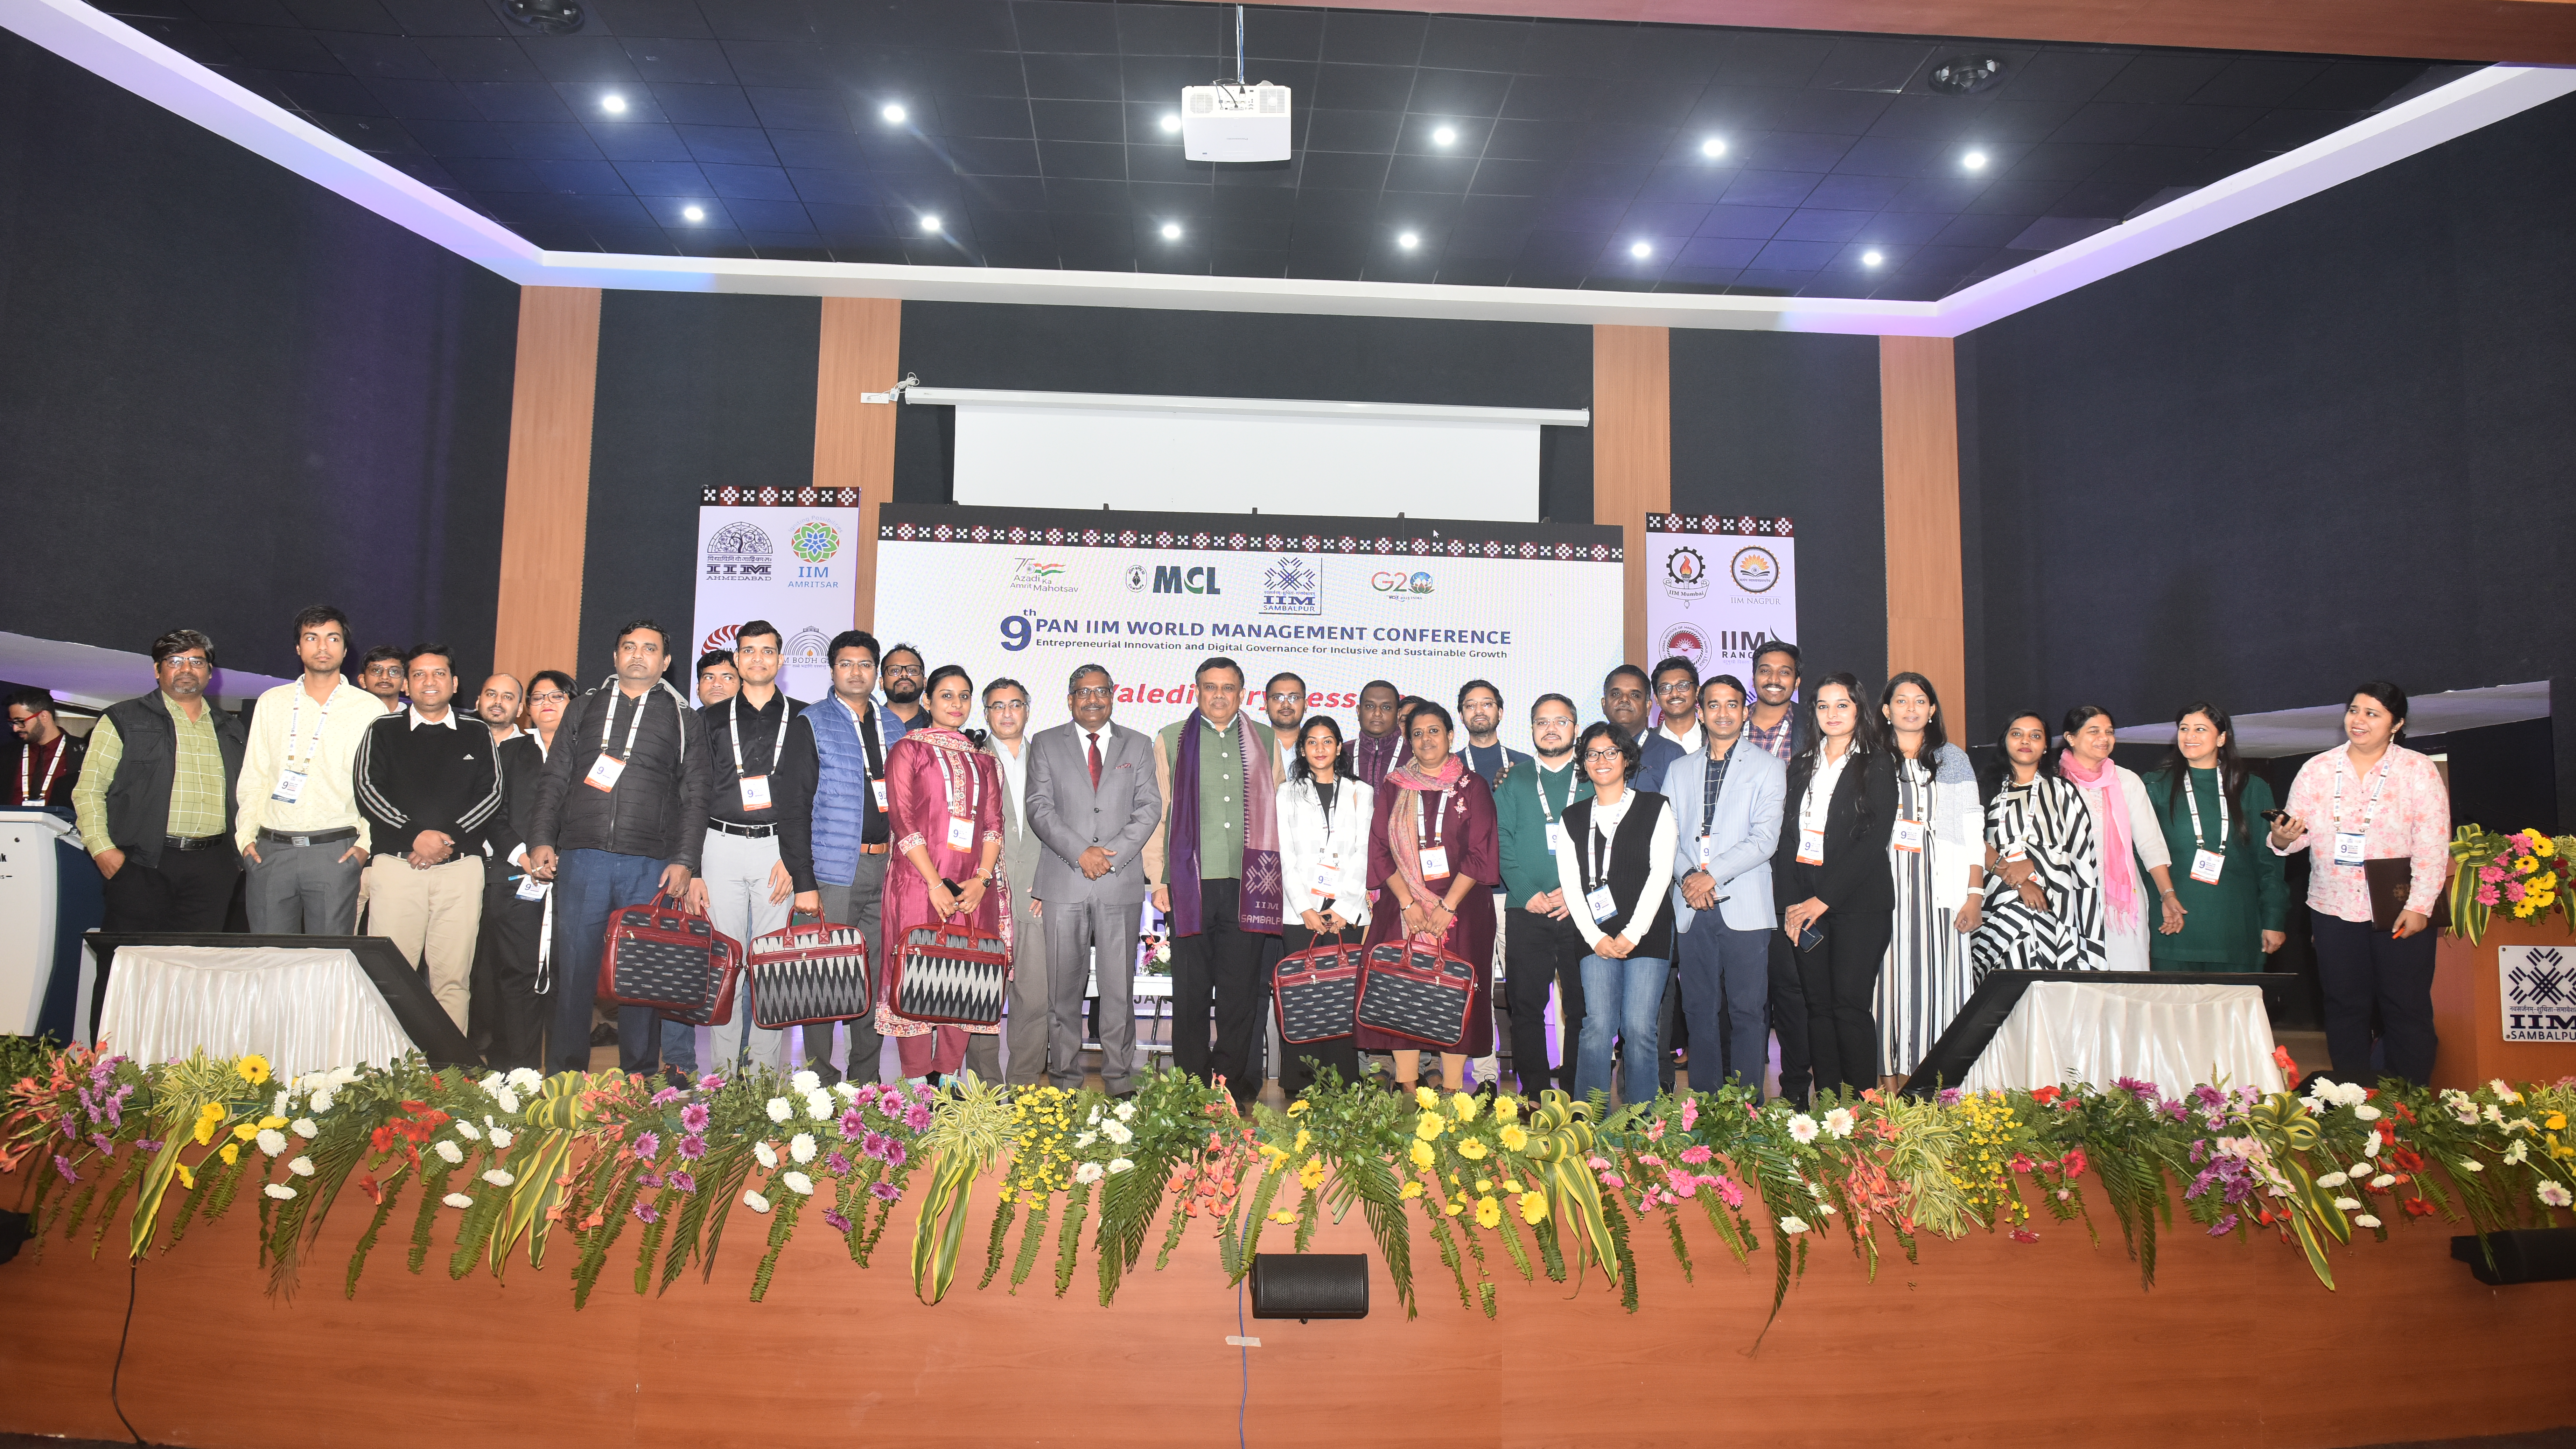 Directors of IIMs Illuminate paths to enhance managerial capacities and foster collaboration